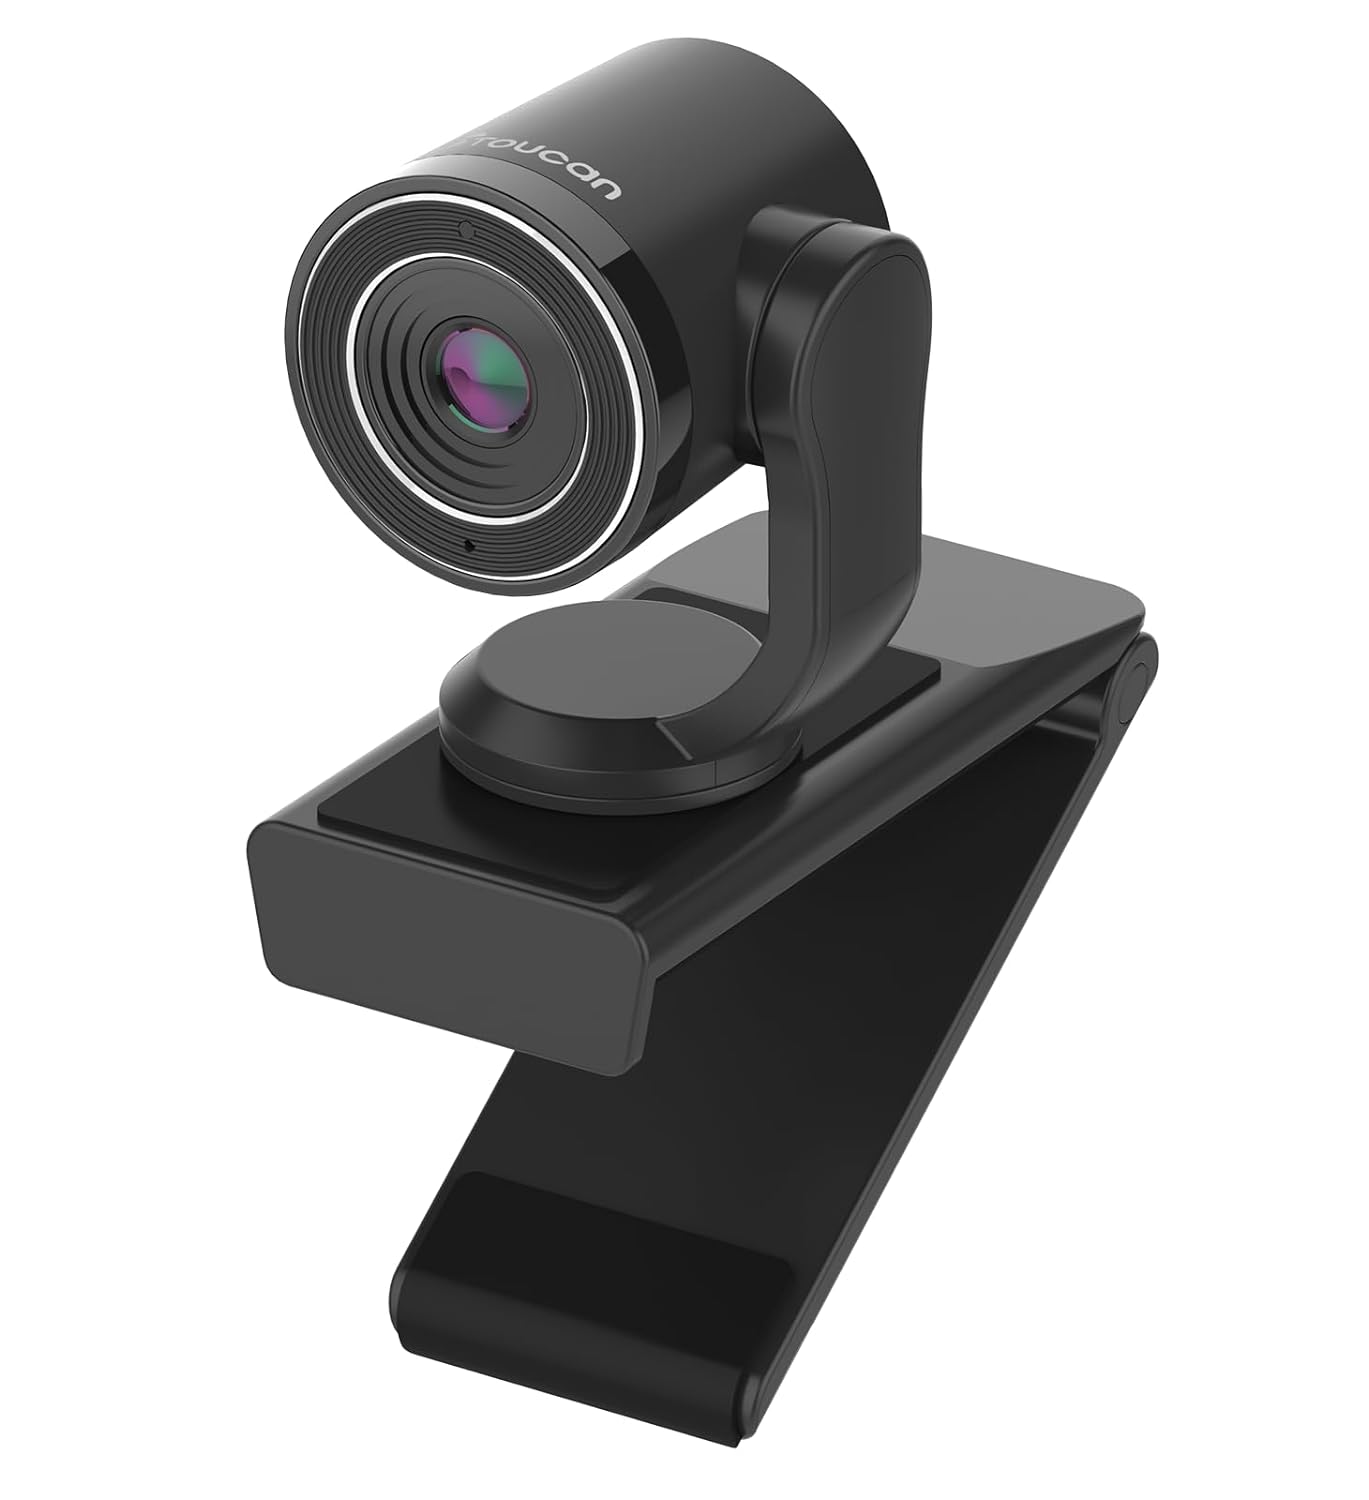 TOUCAN 1080P Webcam with Microphone,89° View, Noise-Canceling Mic, Plug and Play USB Webcam Conferencing Streaming Works with Meeting/Online Classes/Zoom/YouTube,for Laptop/Desktop/Tablet